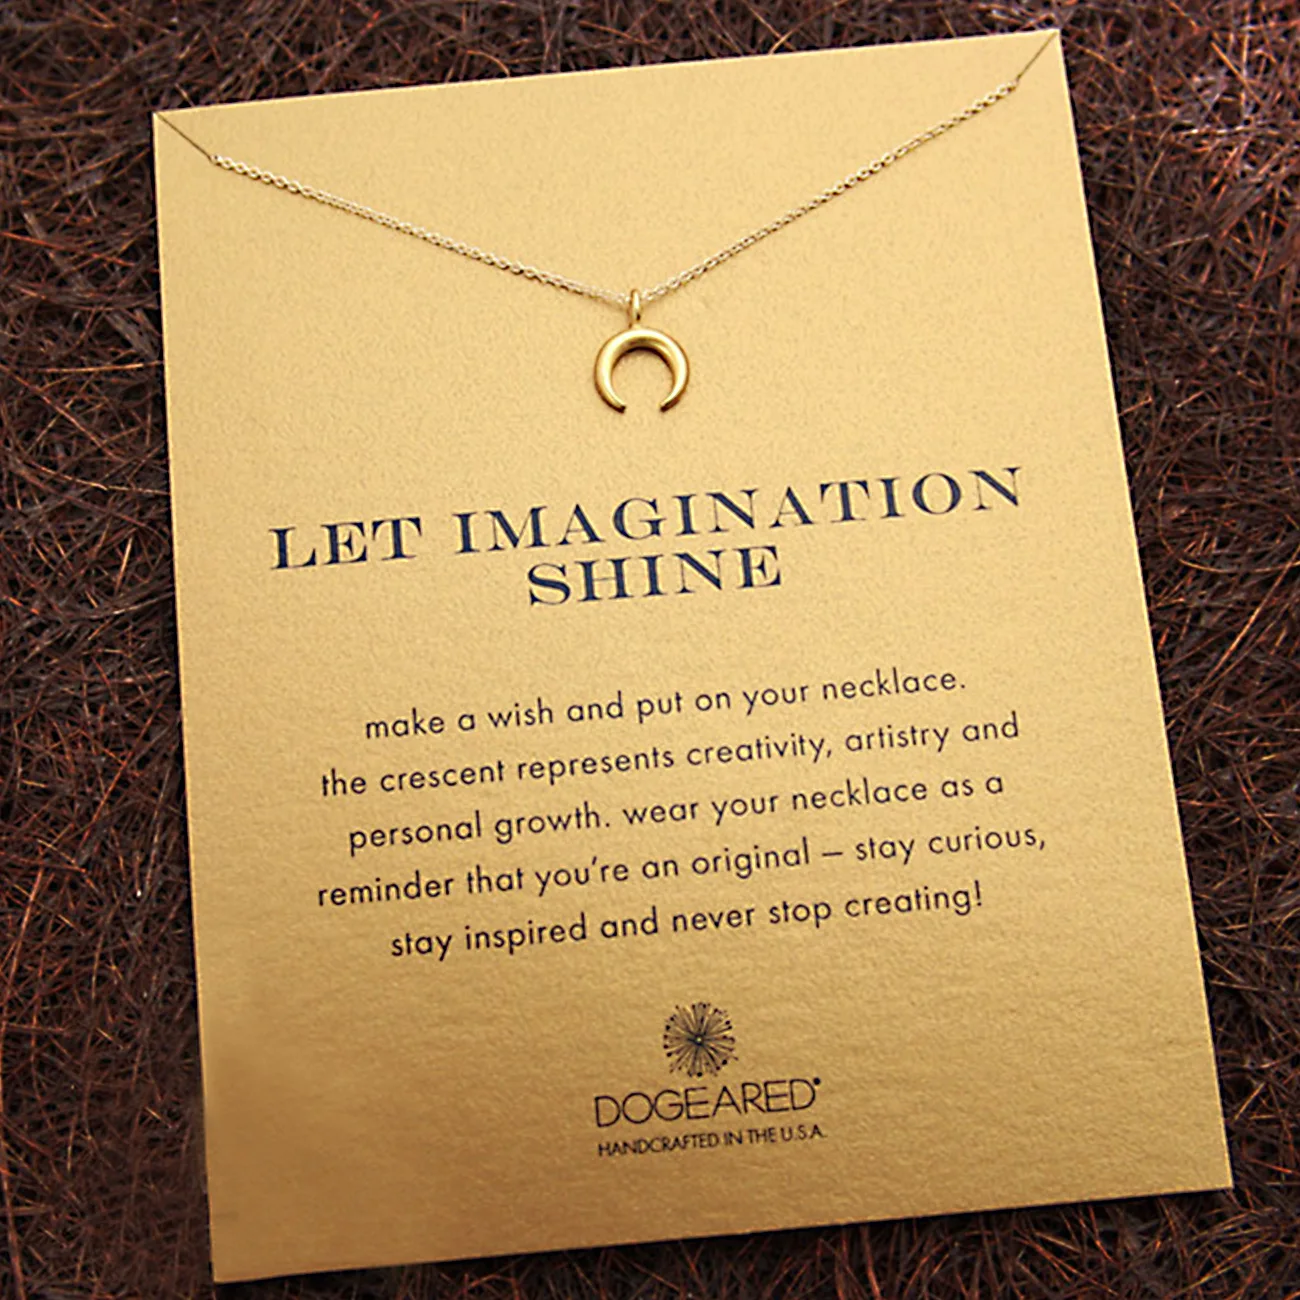 

2020 New Arrival Friendship Infinity Wish Necklace Gold Plated Good Luck Elephant Pendant Chain Necklace with Message Card, As the pictures